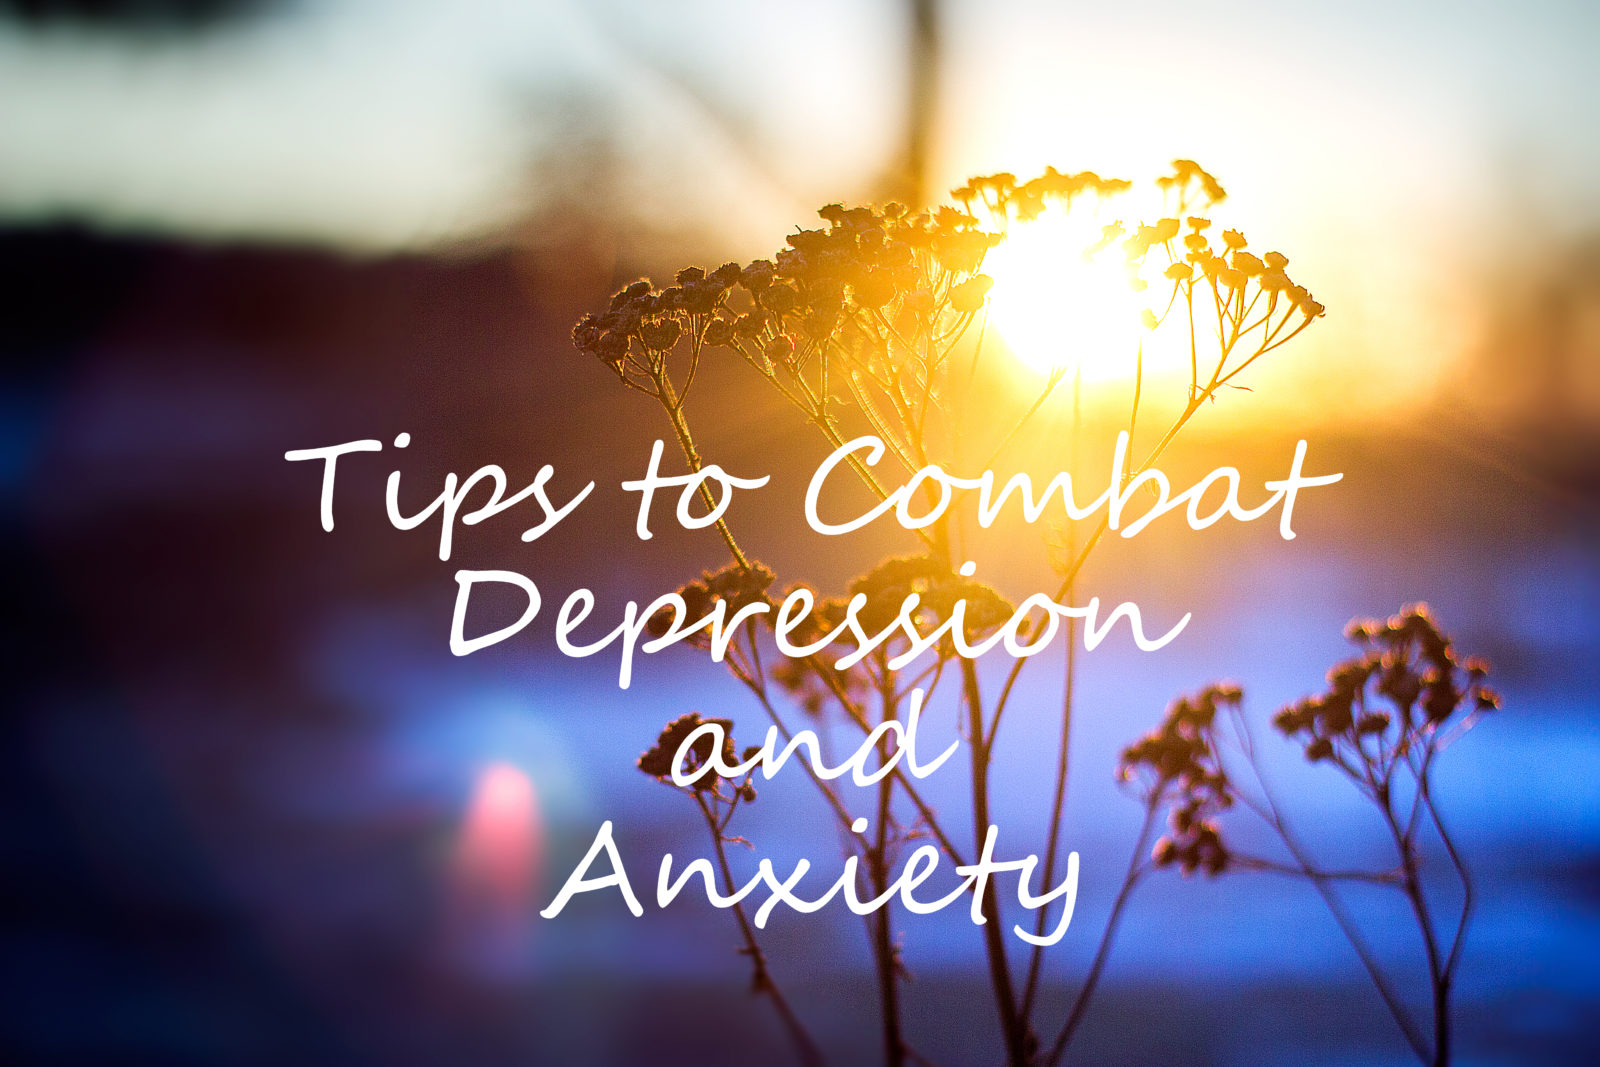 Tips to Fight Depression